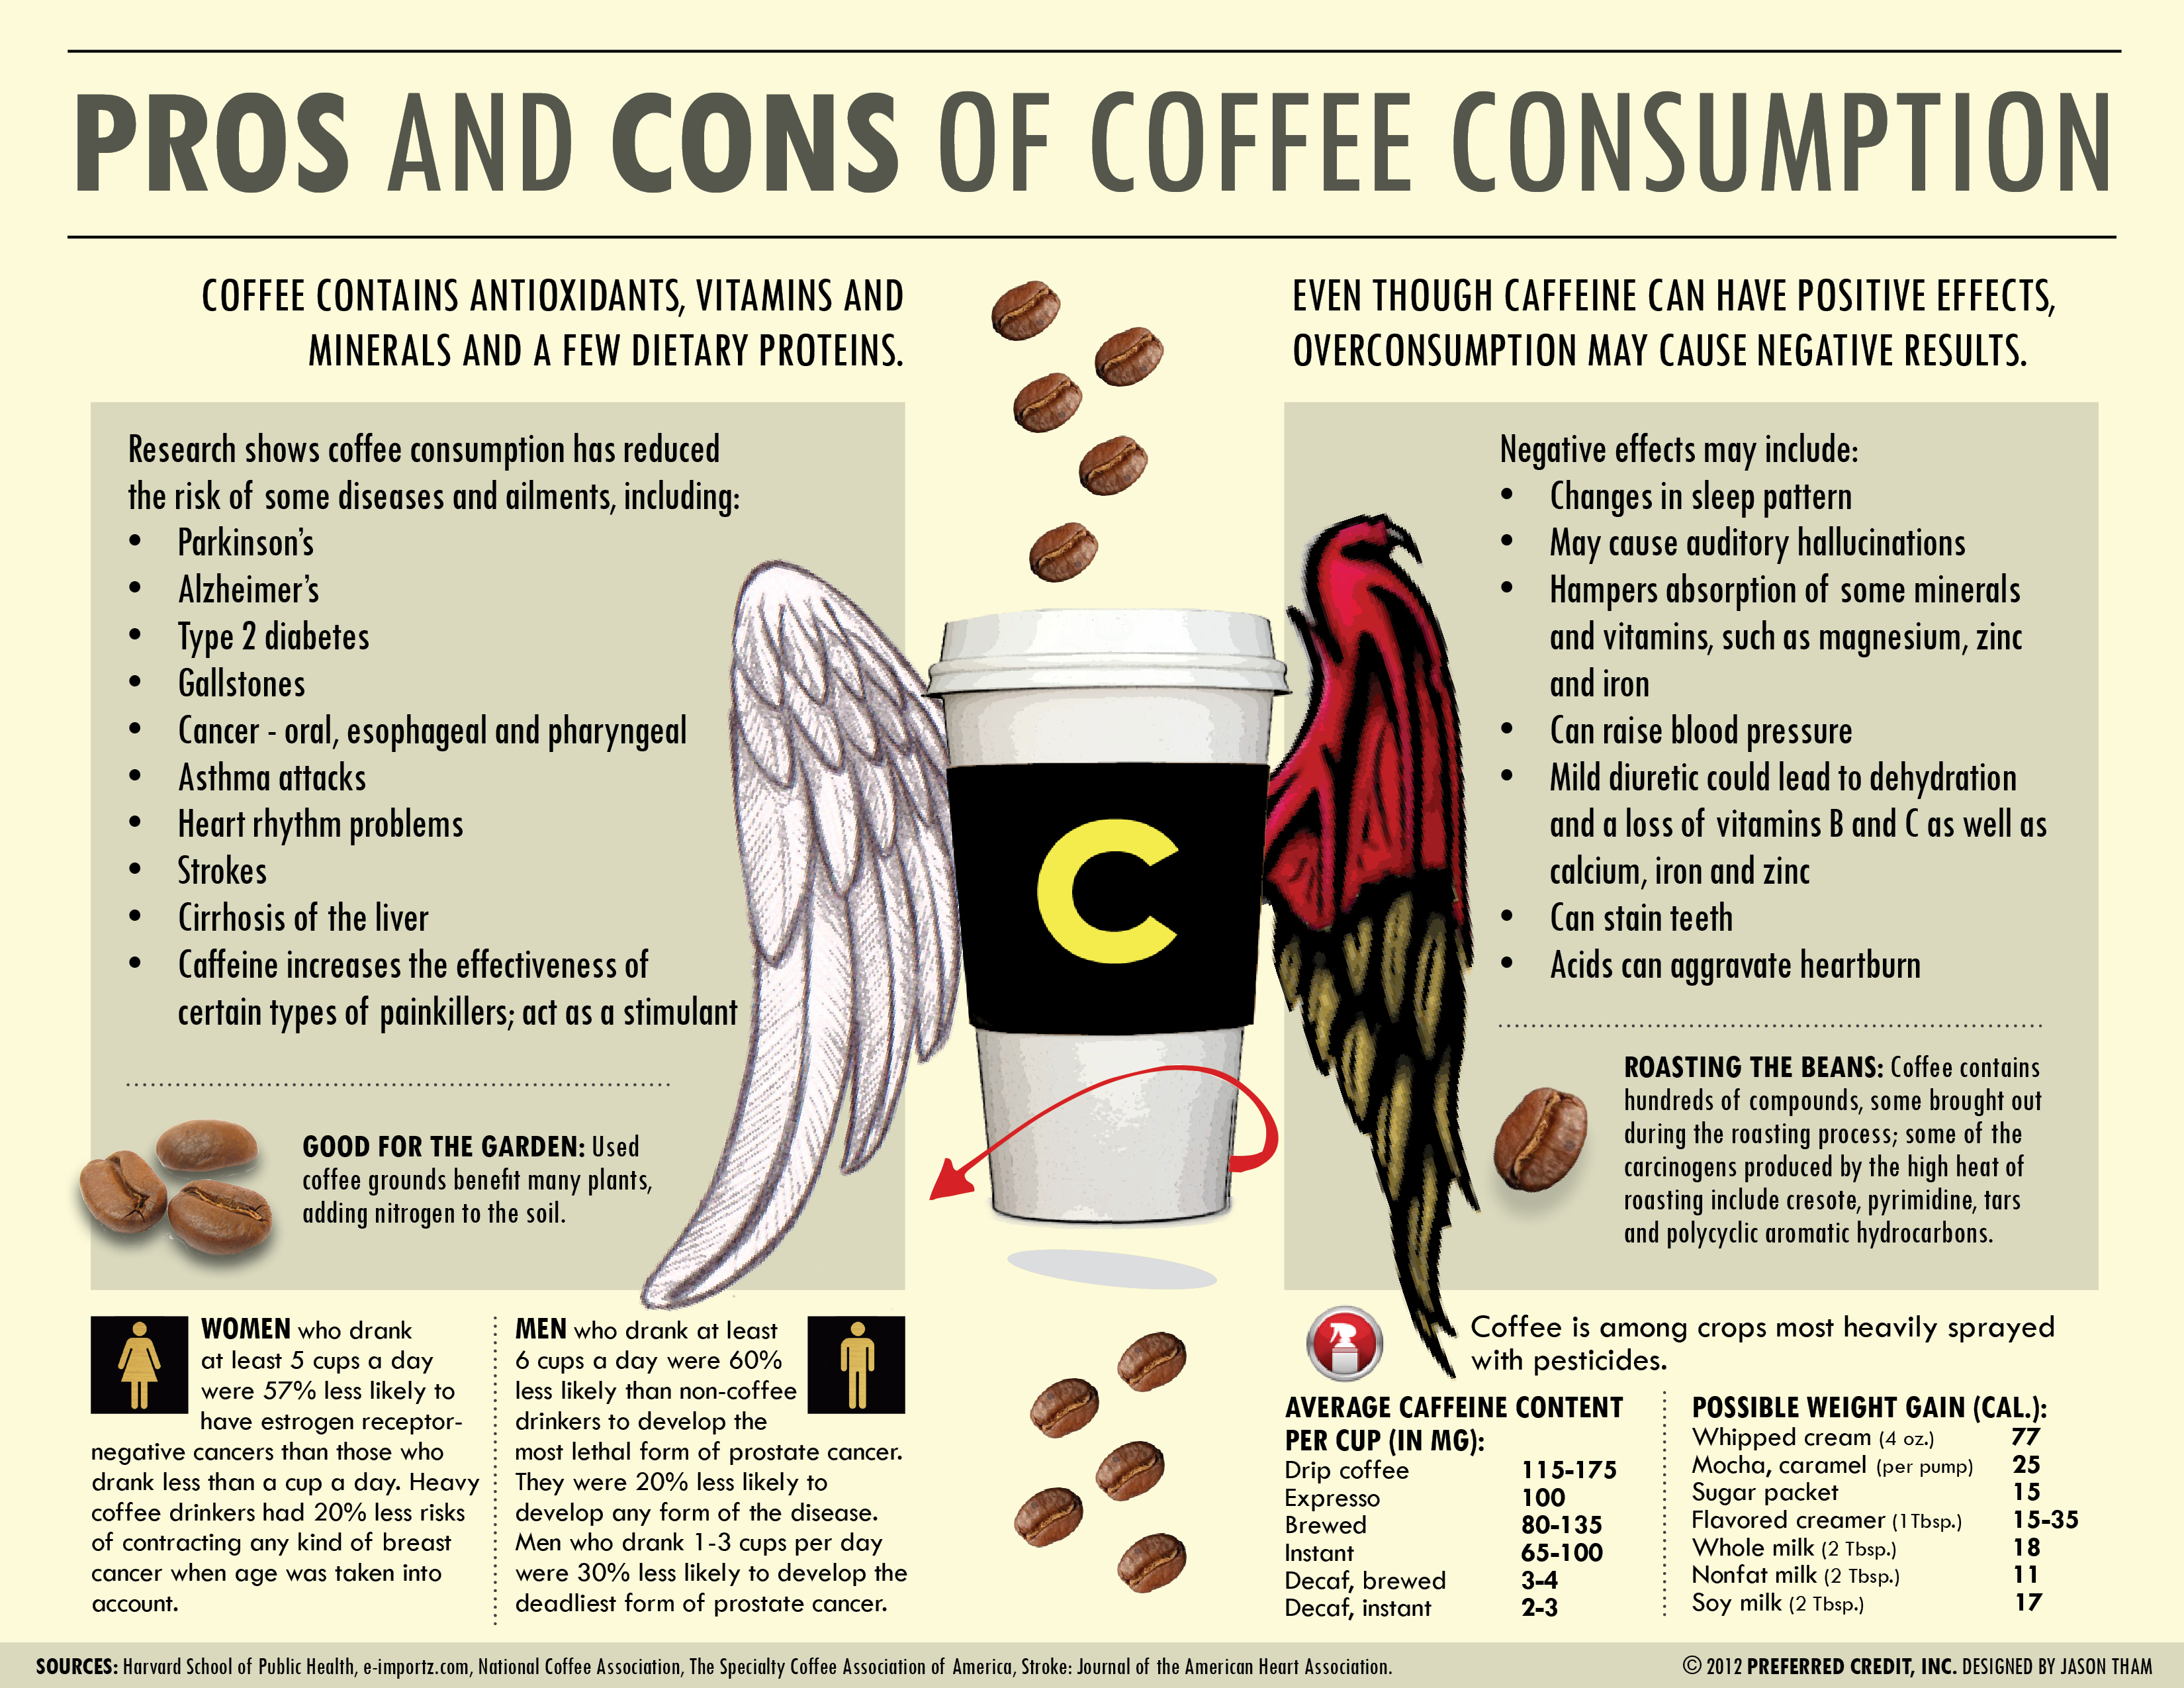 Pros and cons of coffee consumption